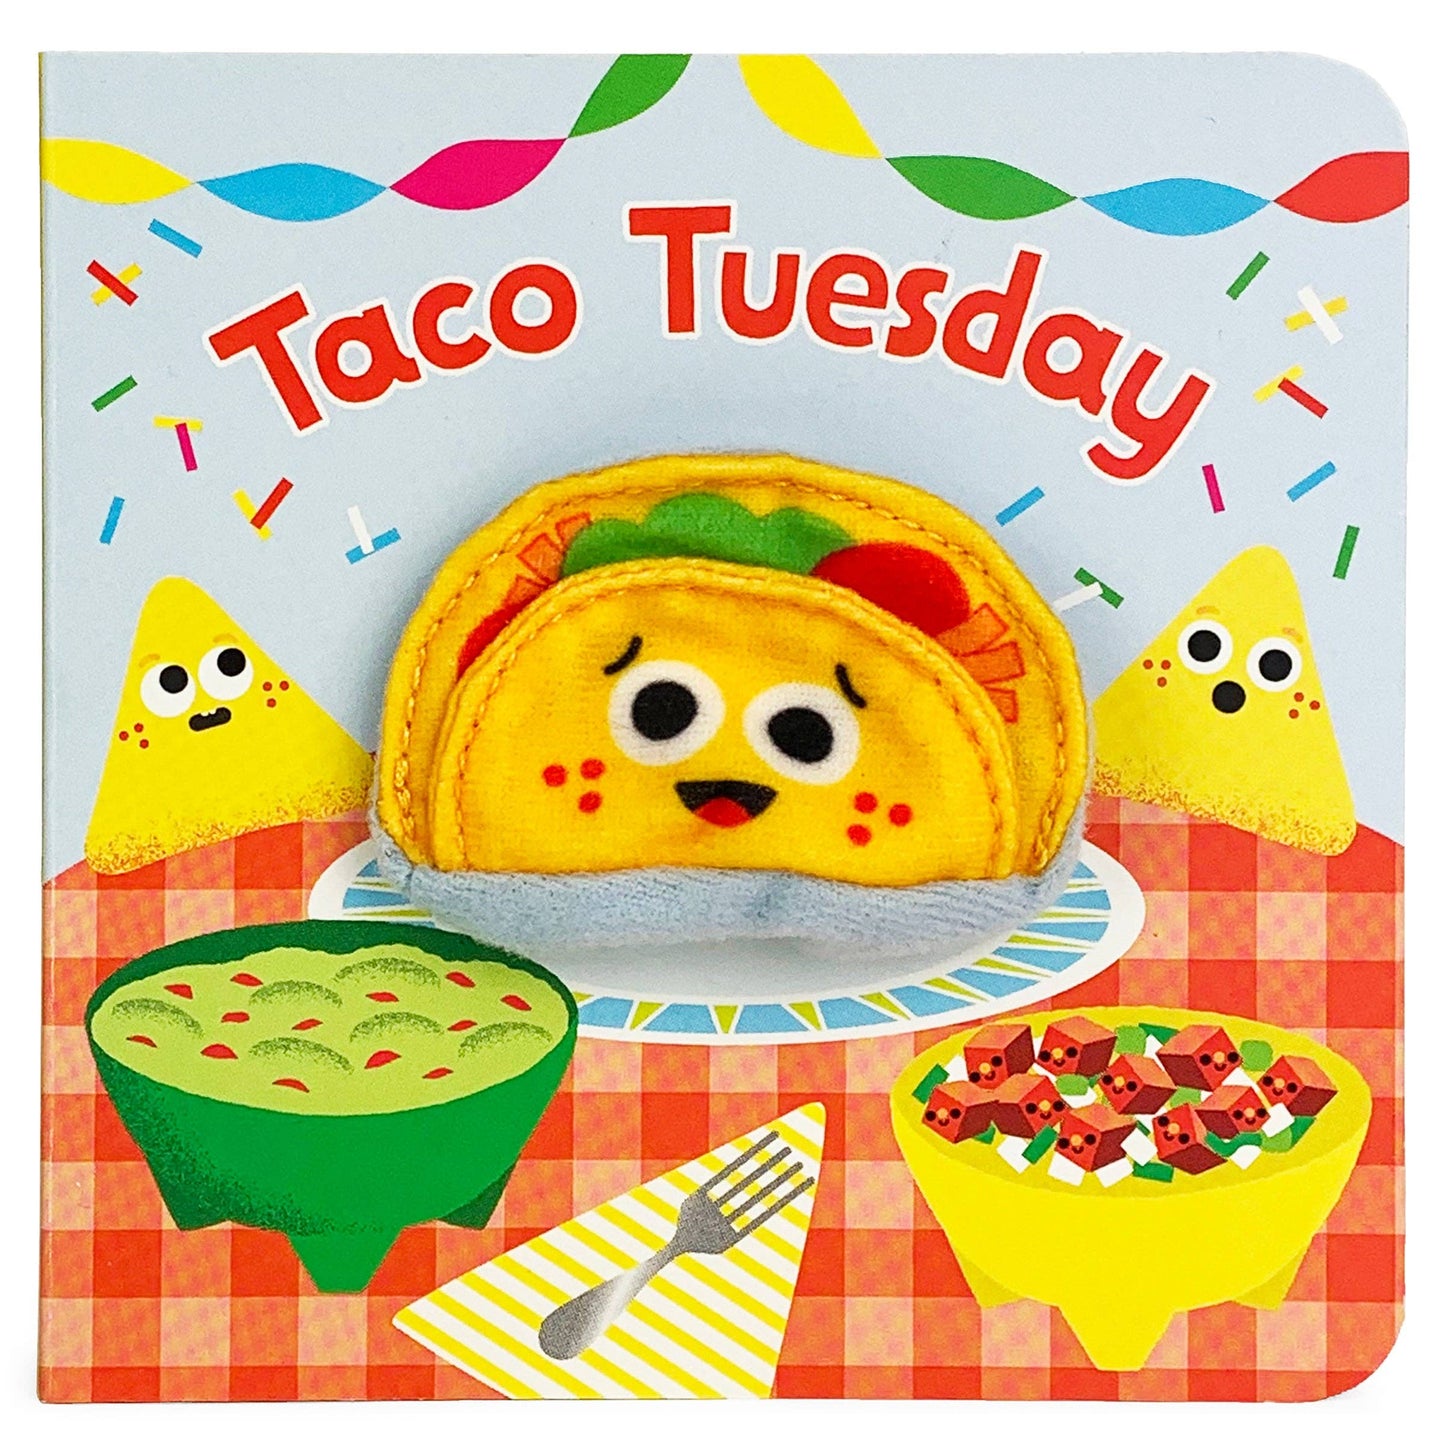 Cottage Door Press - Taco Tuesday Finger Puppet Book